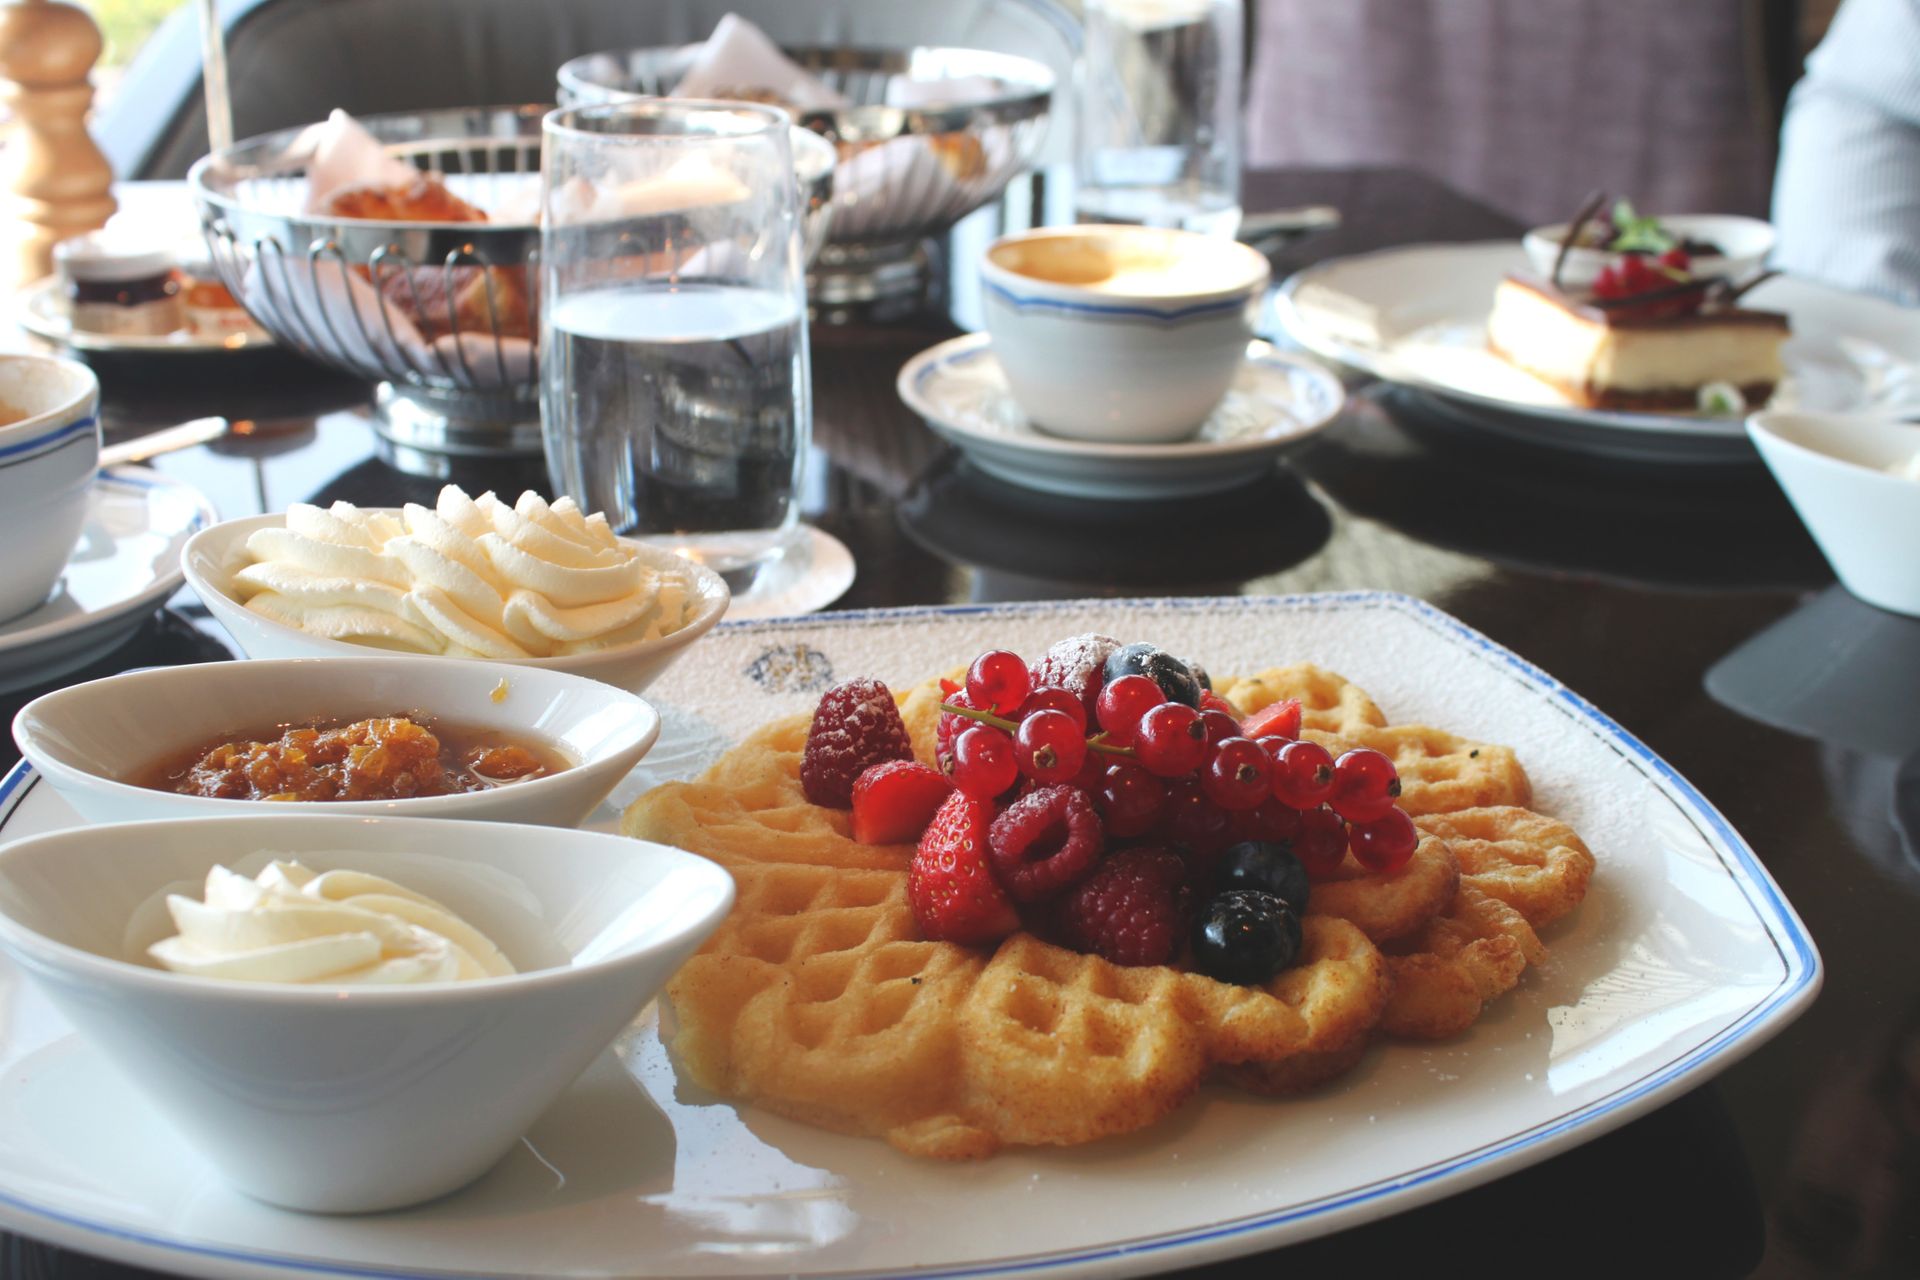 A table set with waffles, dessert and coffee.